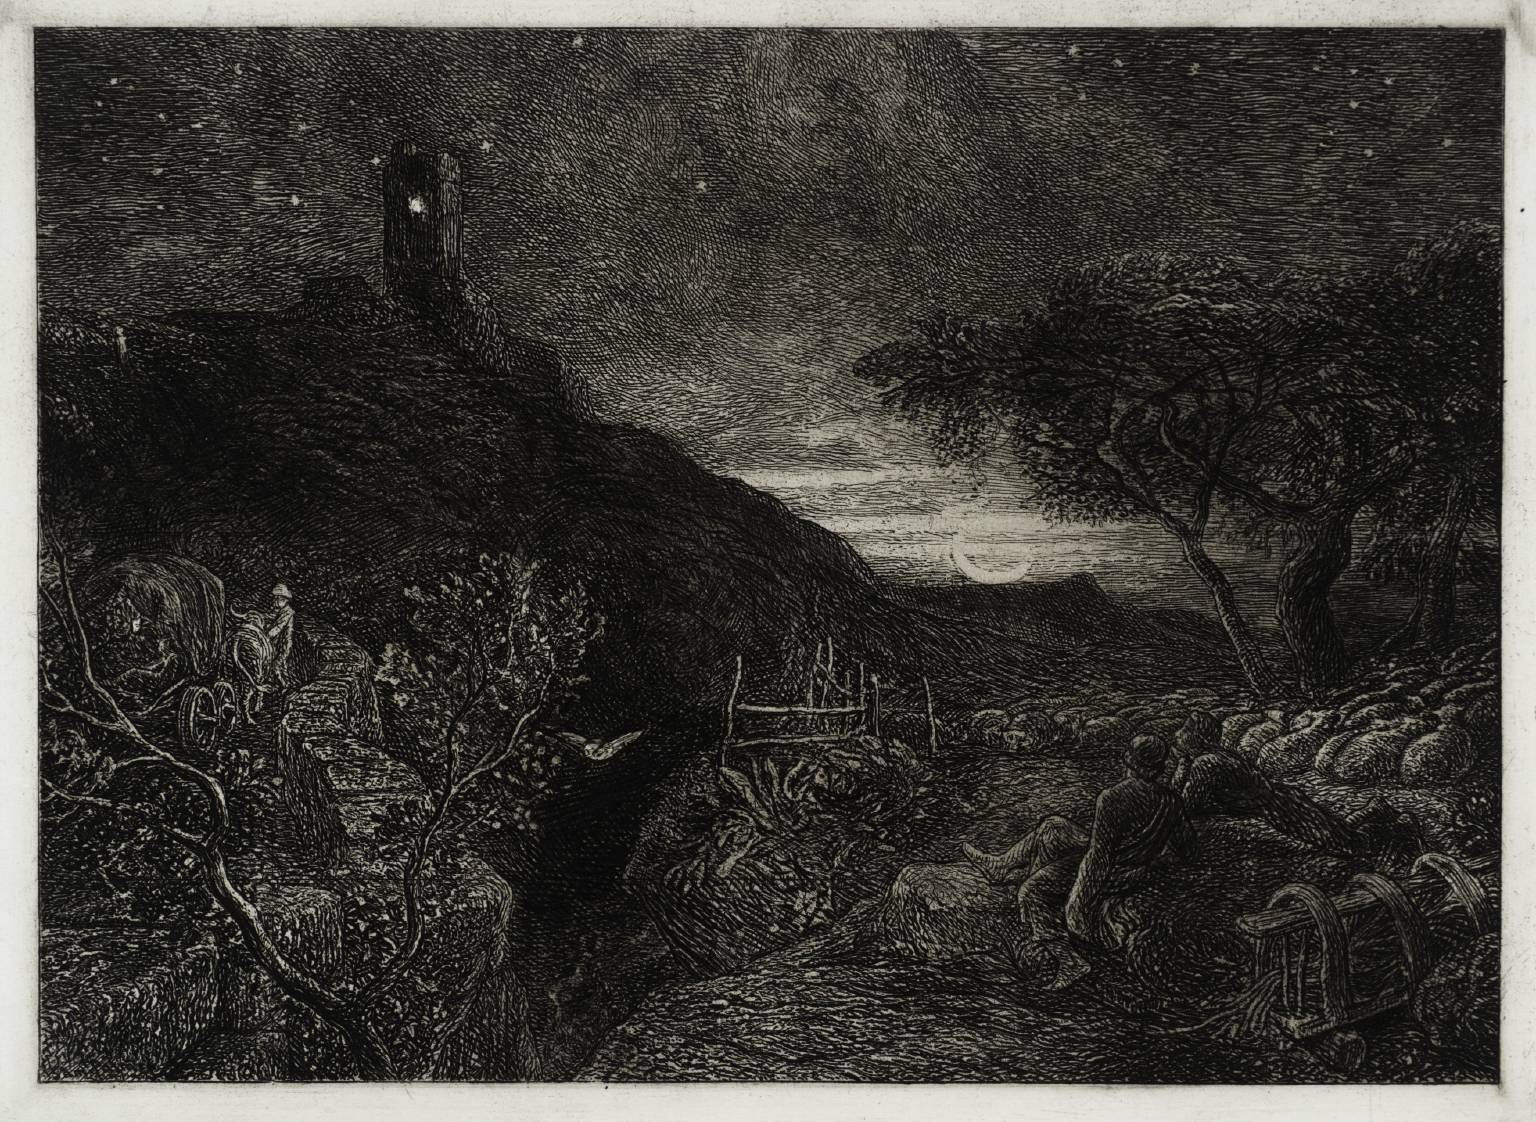 Dark night sketch with tower on hill and farmer resting with sheep below